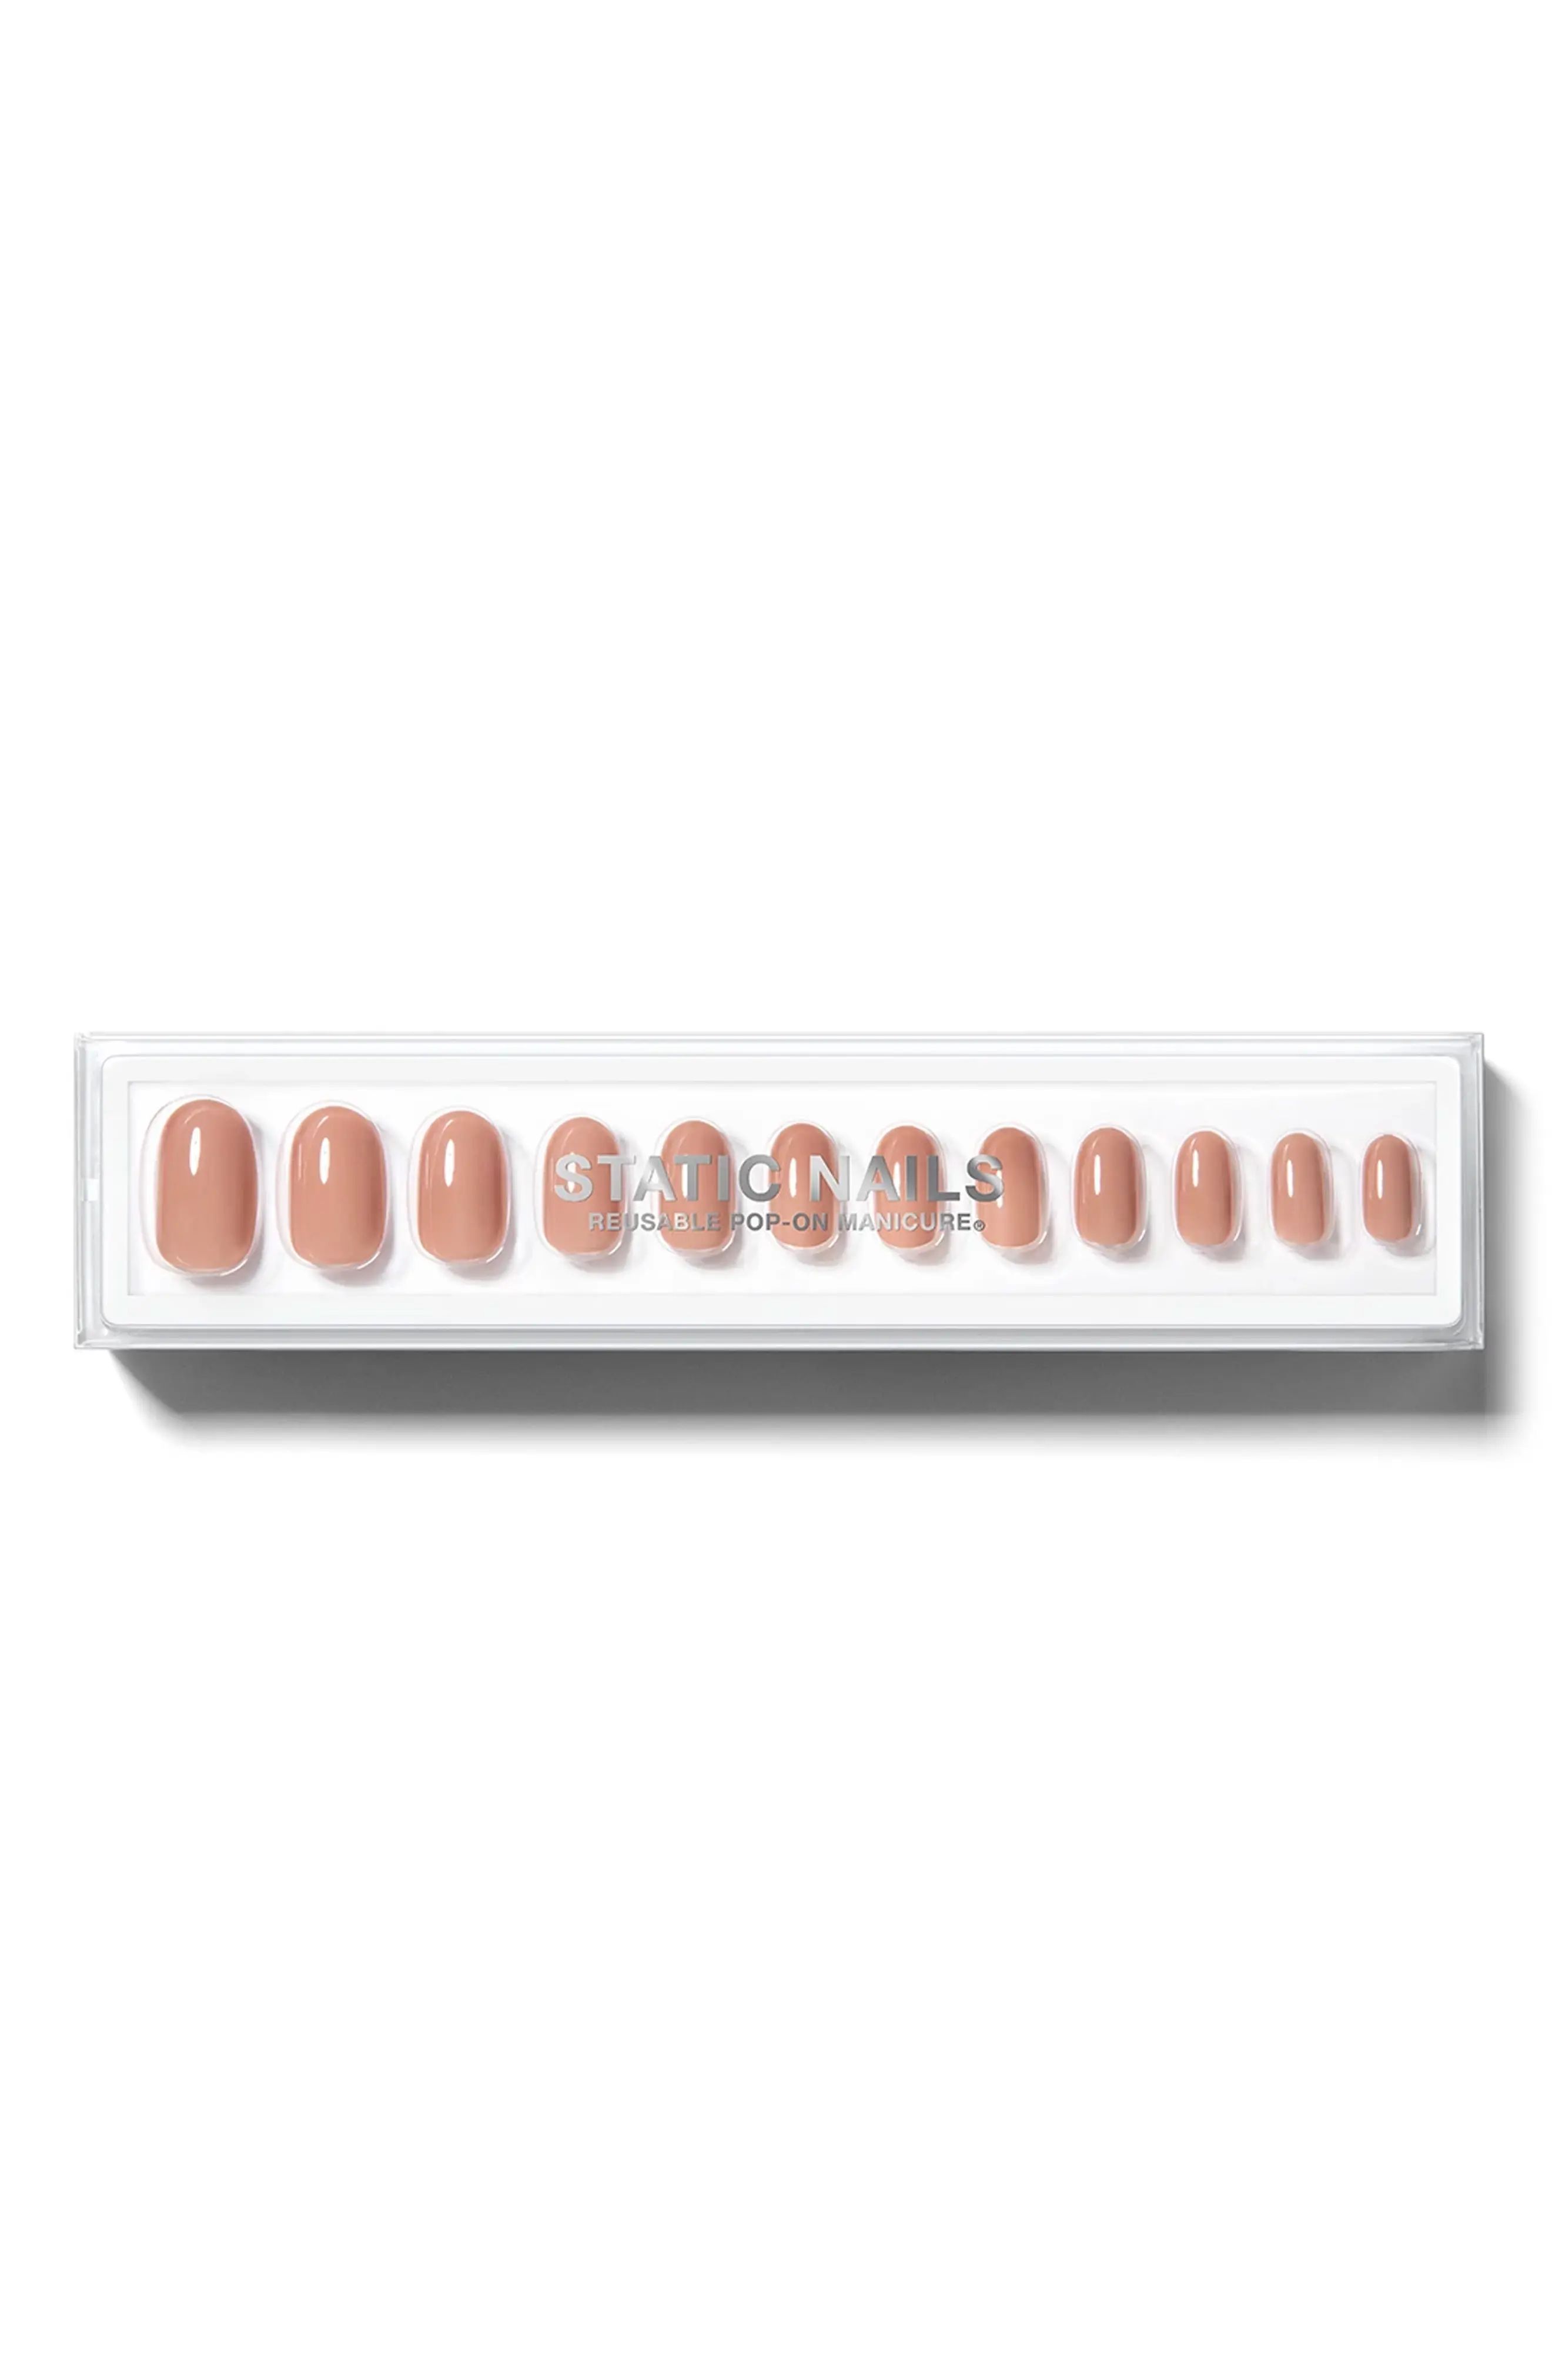 Static Nails Round Pop-On Reusable Manicure Set - Spotted Nude Cheetah | Nordstrom